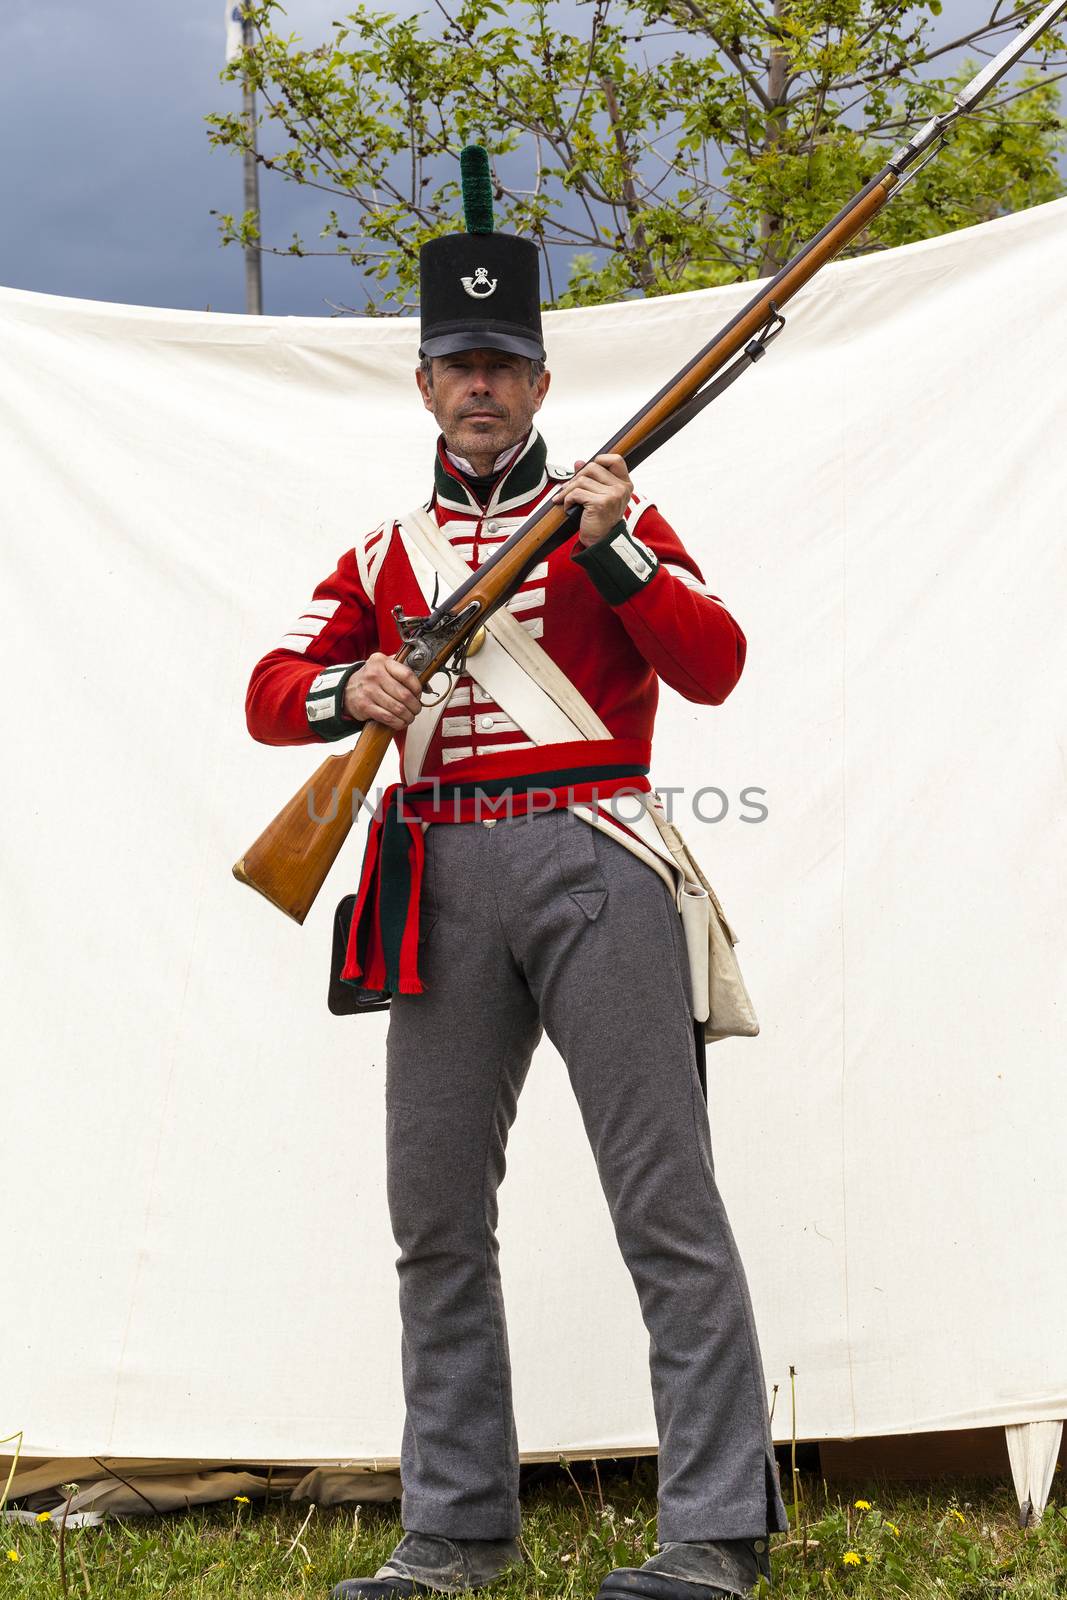 CALGARY CANADA JUN 13 2015:  The Military Museum organized "Summer Skirmish" event where an unidentified soldier is seen  in a historical Reenactment Battle.